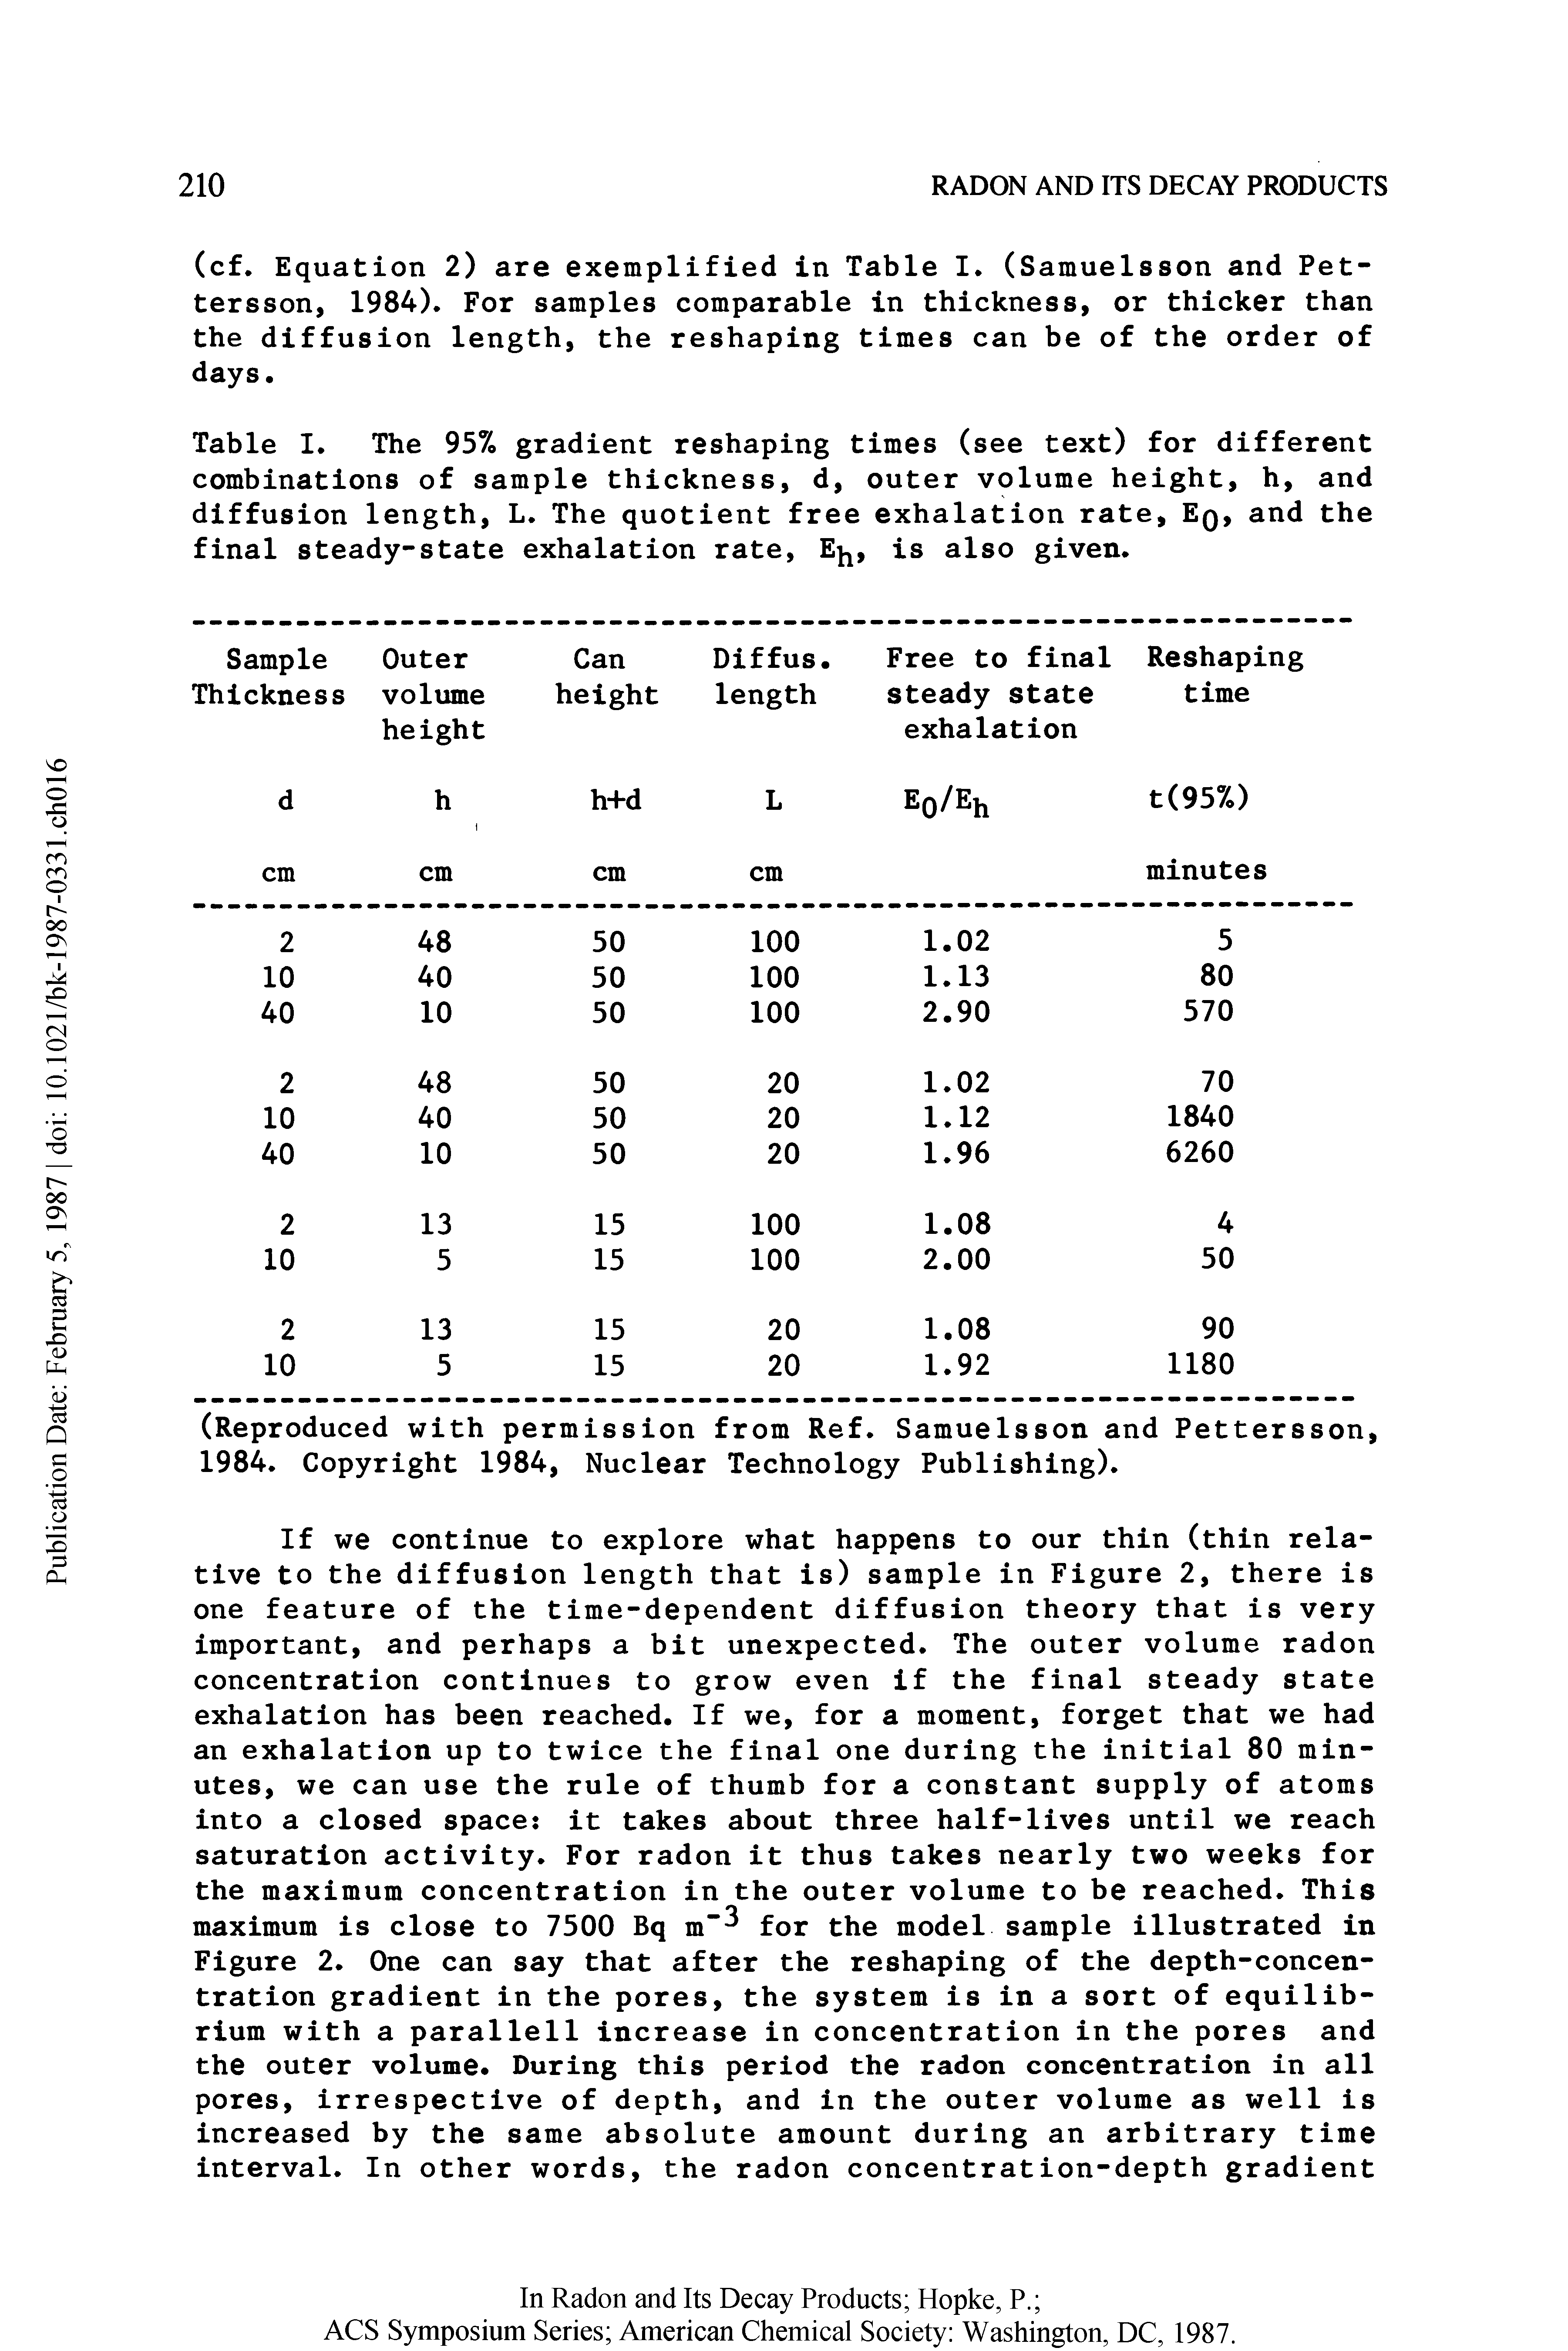 Table I. The 95% gradient reshaping times (see text) for different combinations of sample thickness, d, outer volume height, h, and diffusion length, L. The quotient free exhalation rate, Eq, and the final steady-state exhalation rate, E, is also given.